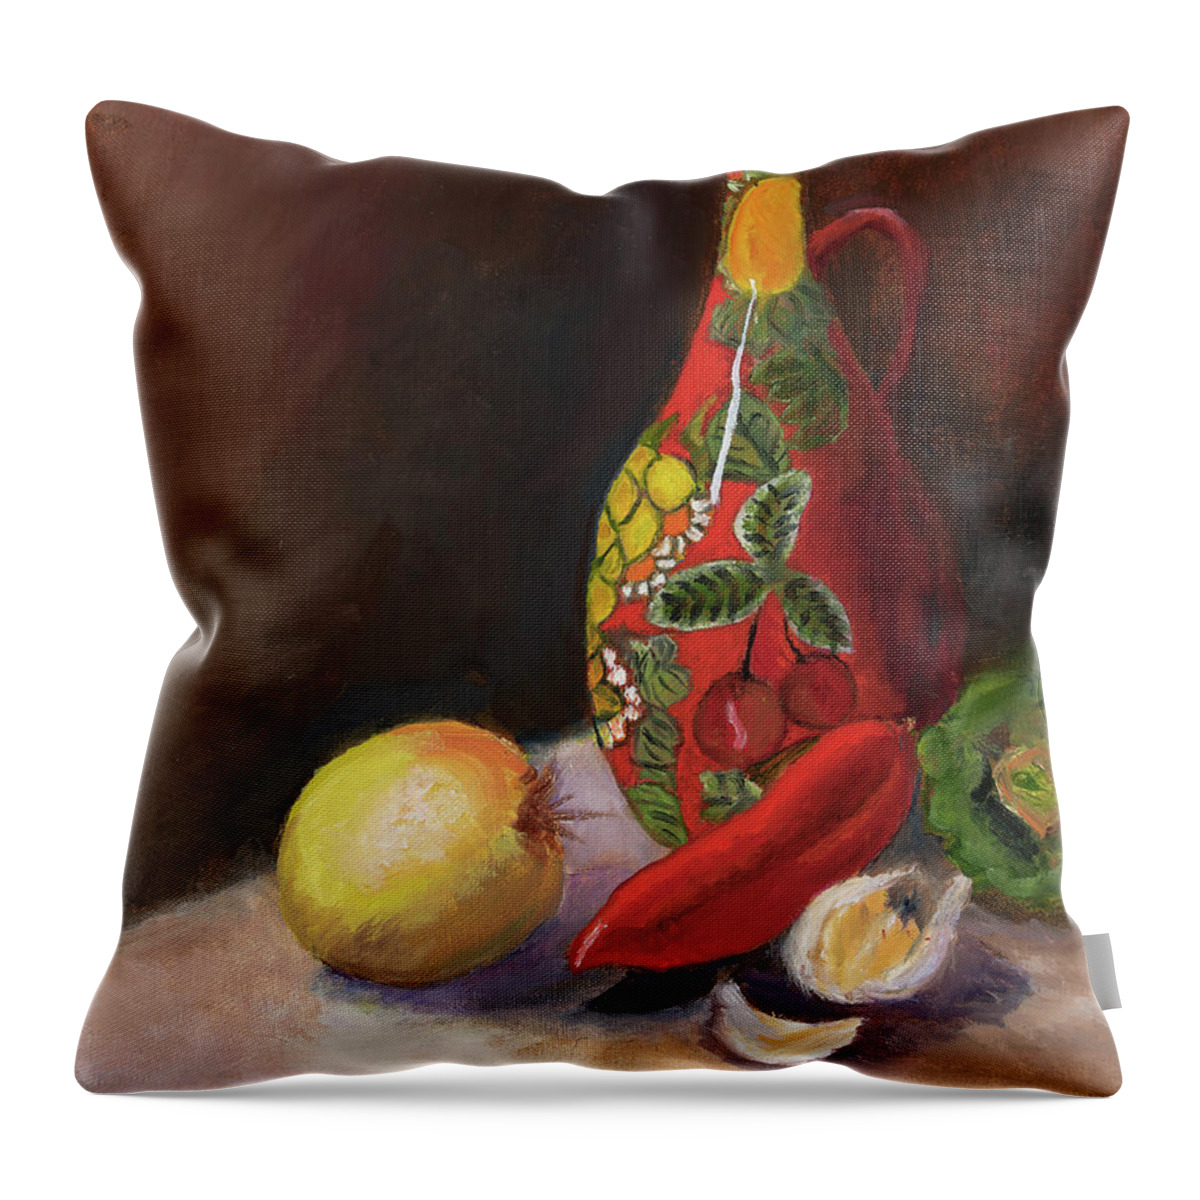 Still Throw Pillow featuring the painting Cindy Beuoy - Salad by Cindy Beuoy